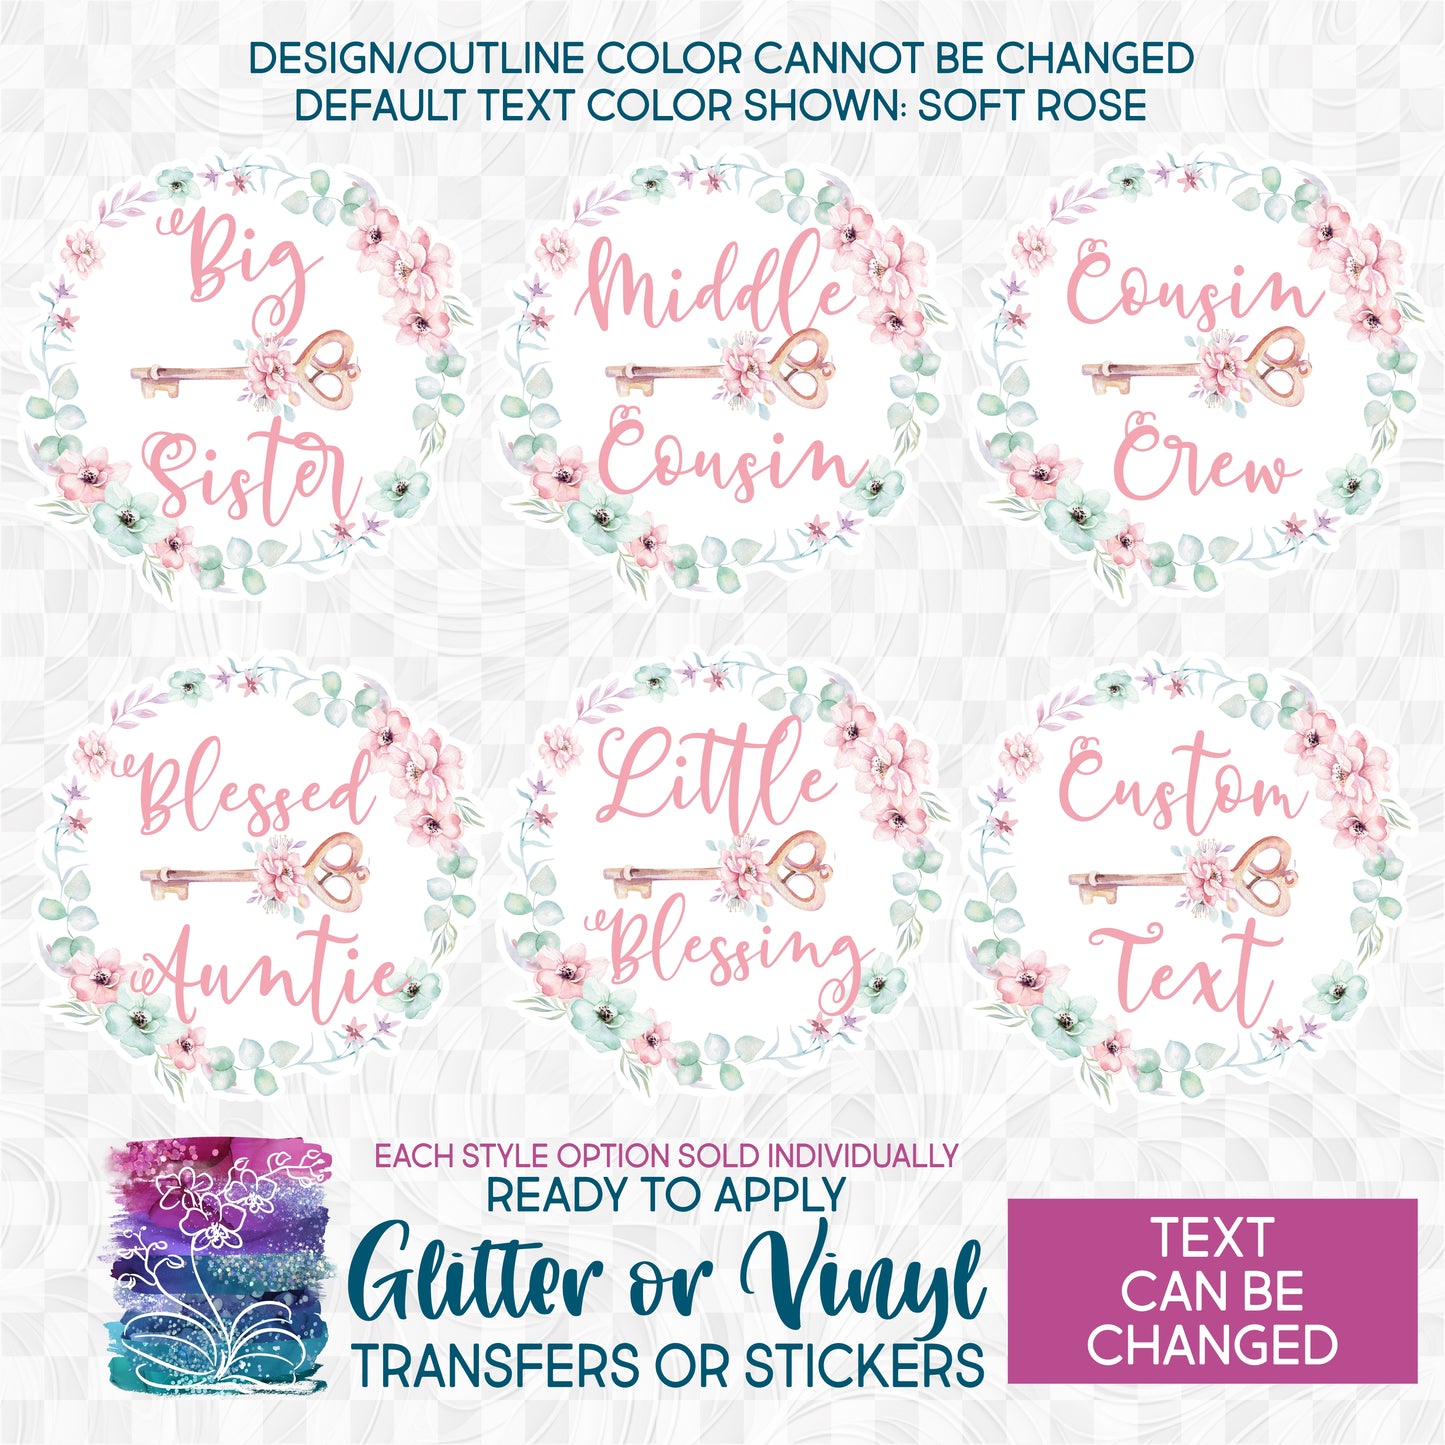 (s199-C) Big Sister, Little Sister, Custom Text Butterfly Key Flowers Floral Watercolor Glitter or Vinyl Iron-On Transfer or Sticker